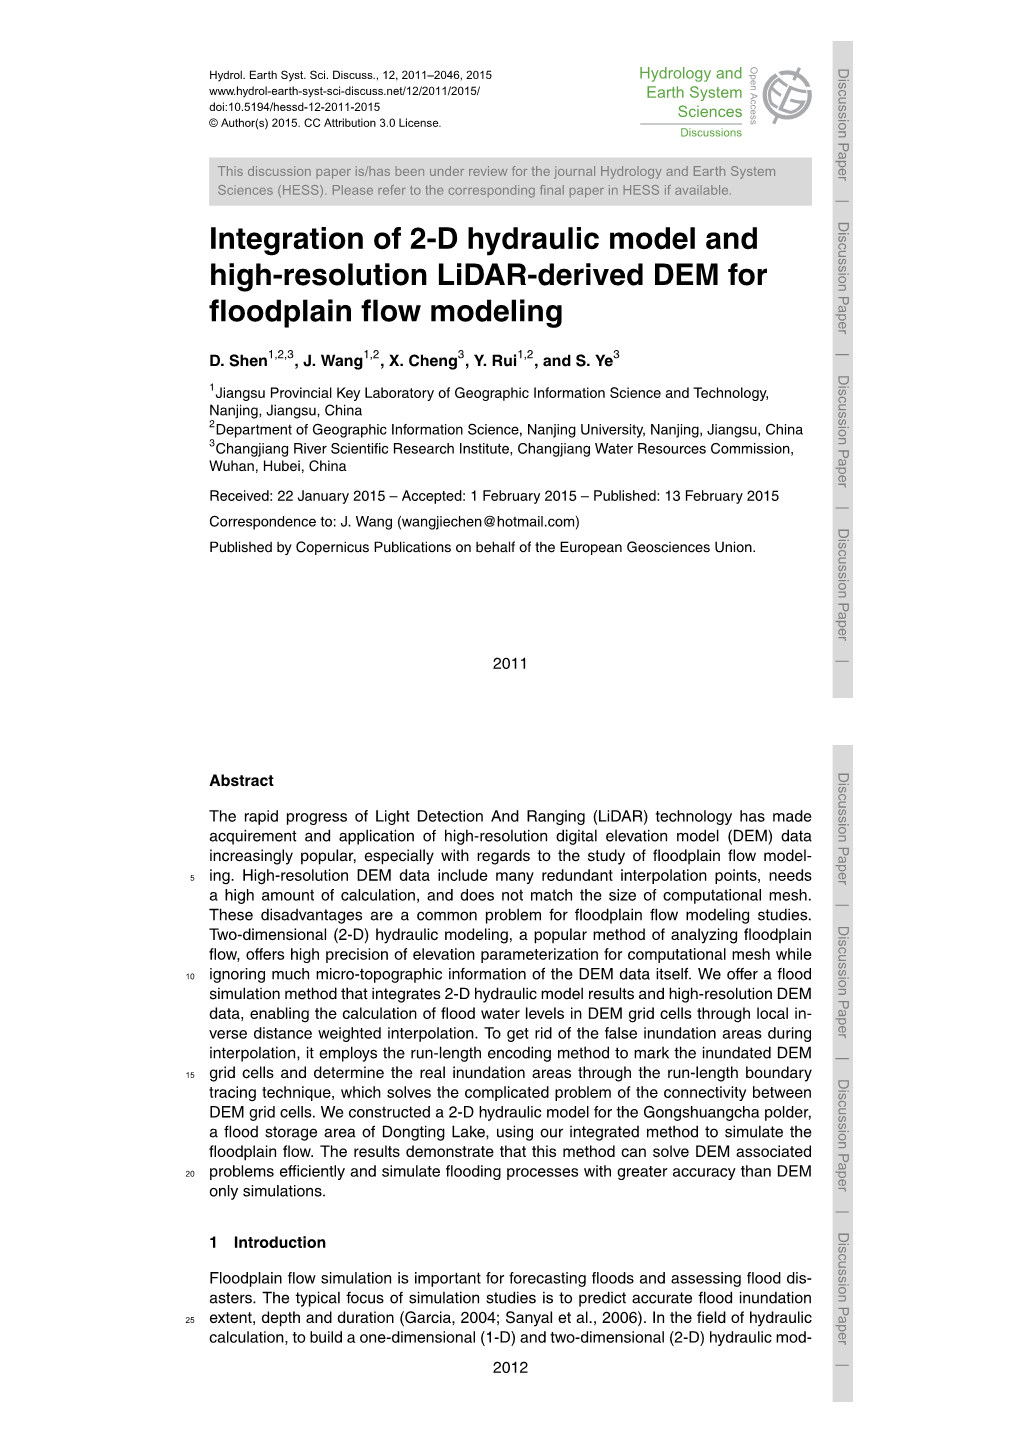 Integration of 2-D Hydraulic Model and High-Resolution Lidar-Derived